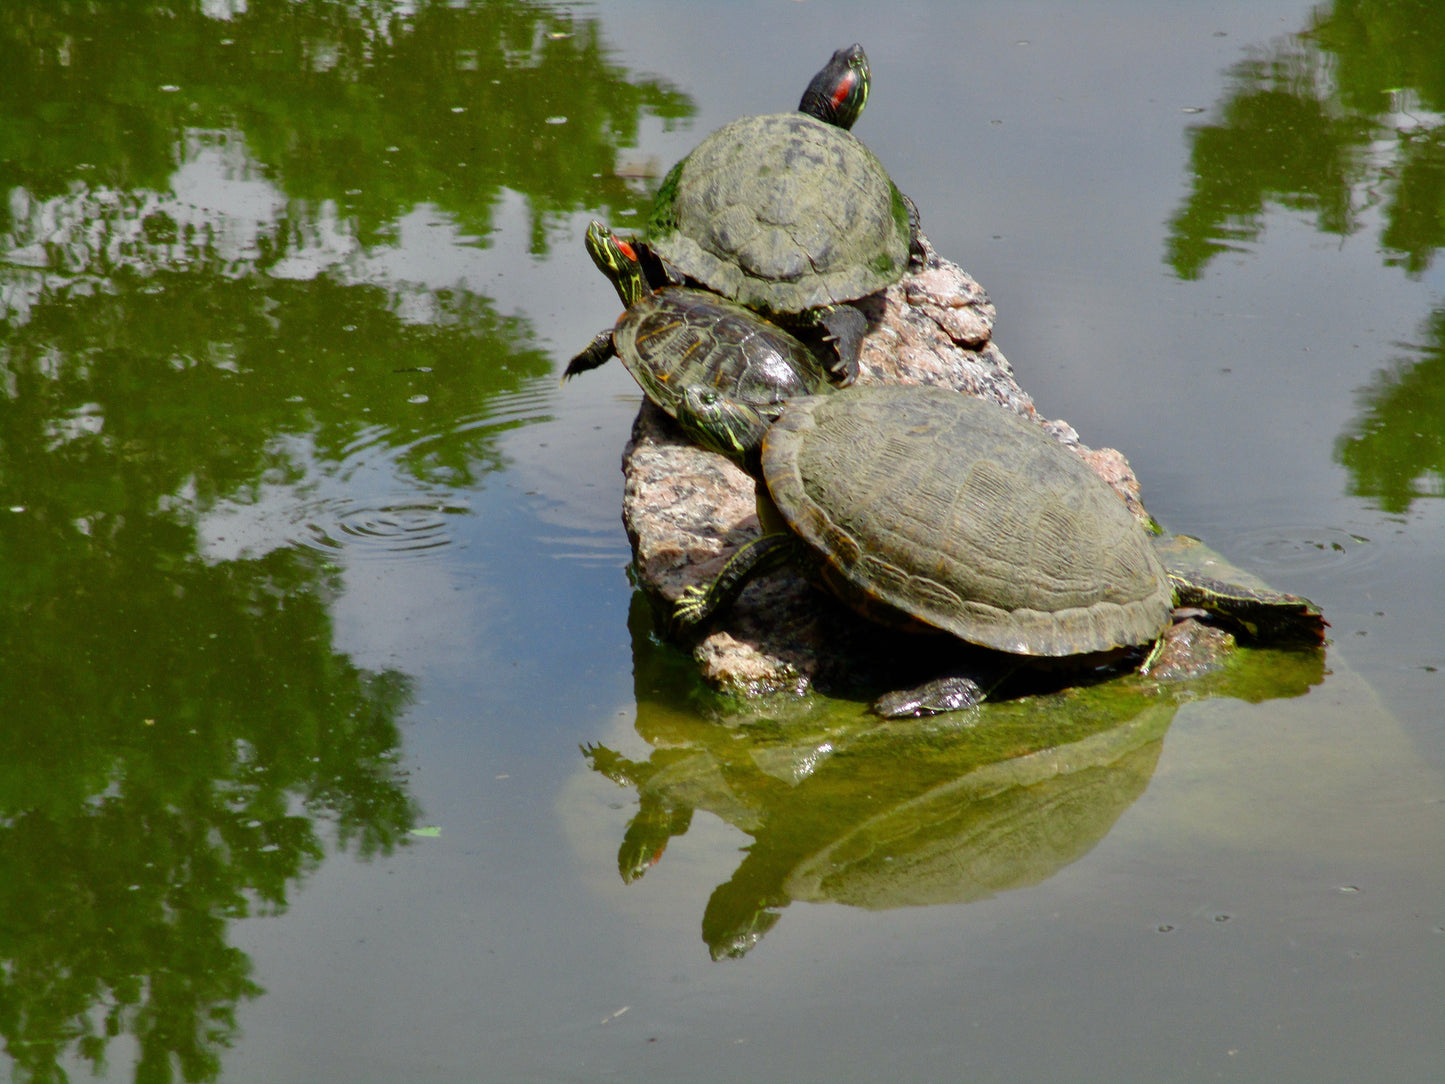 This is a photo of three turtles resting on a rock in a pond